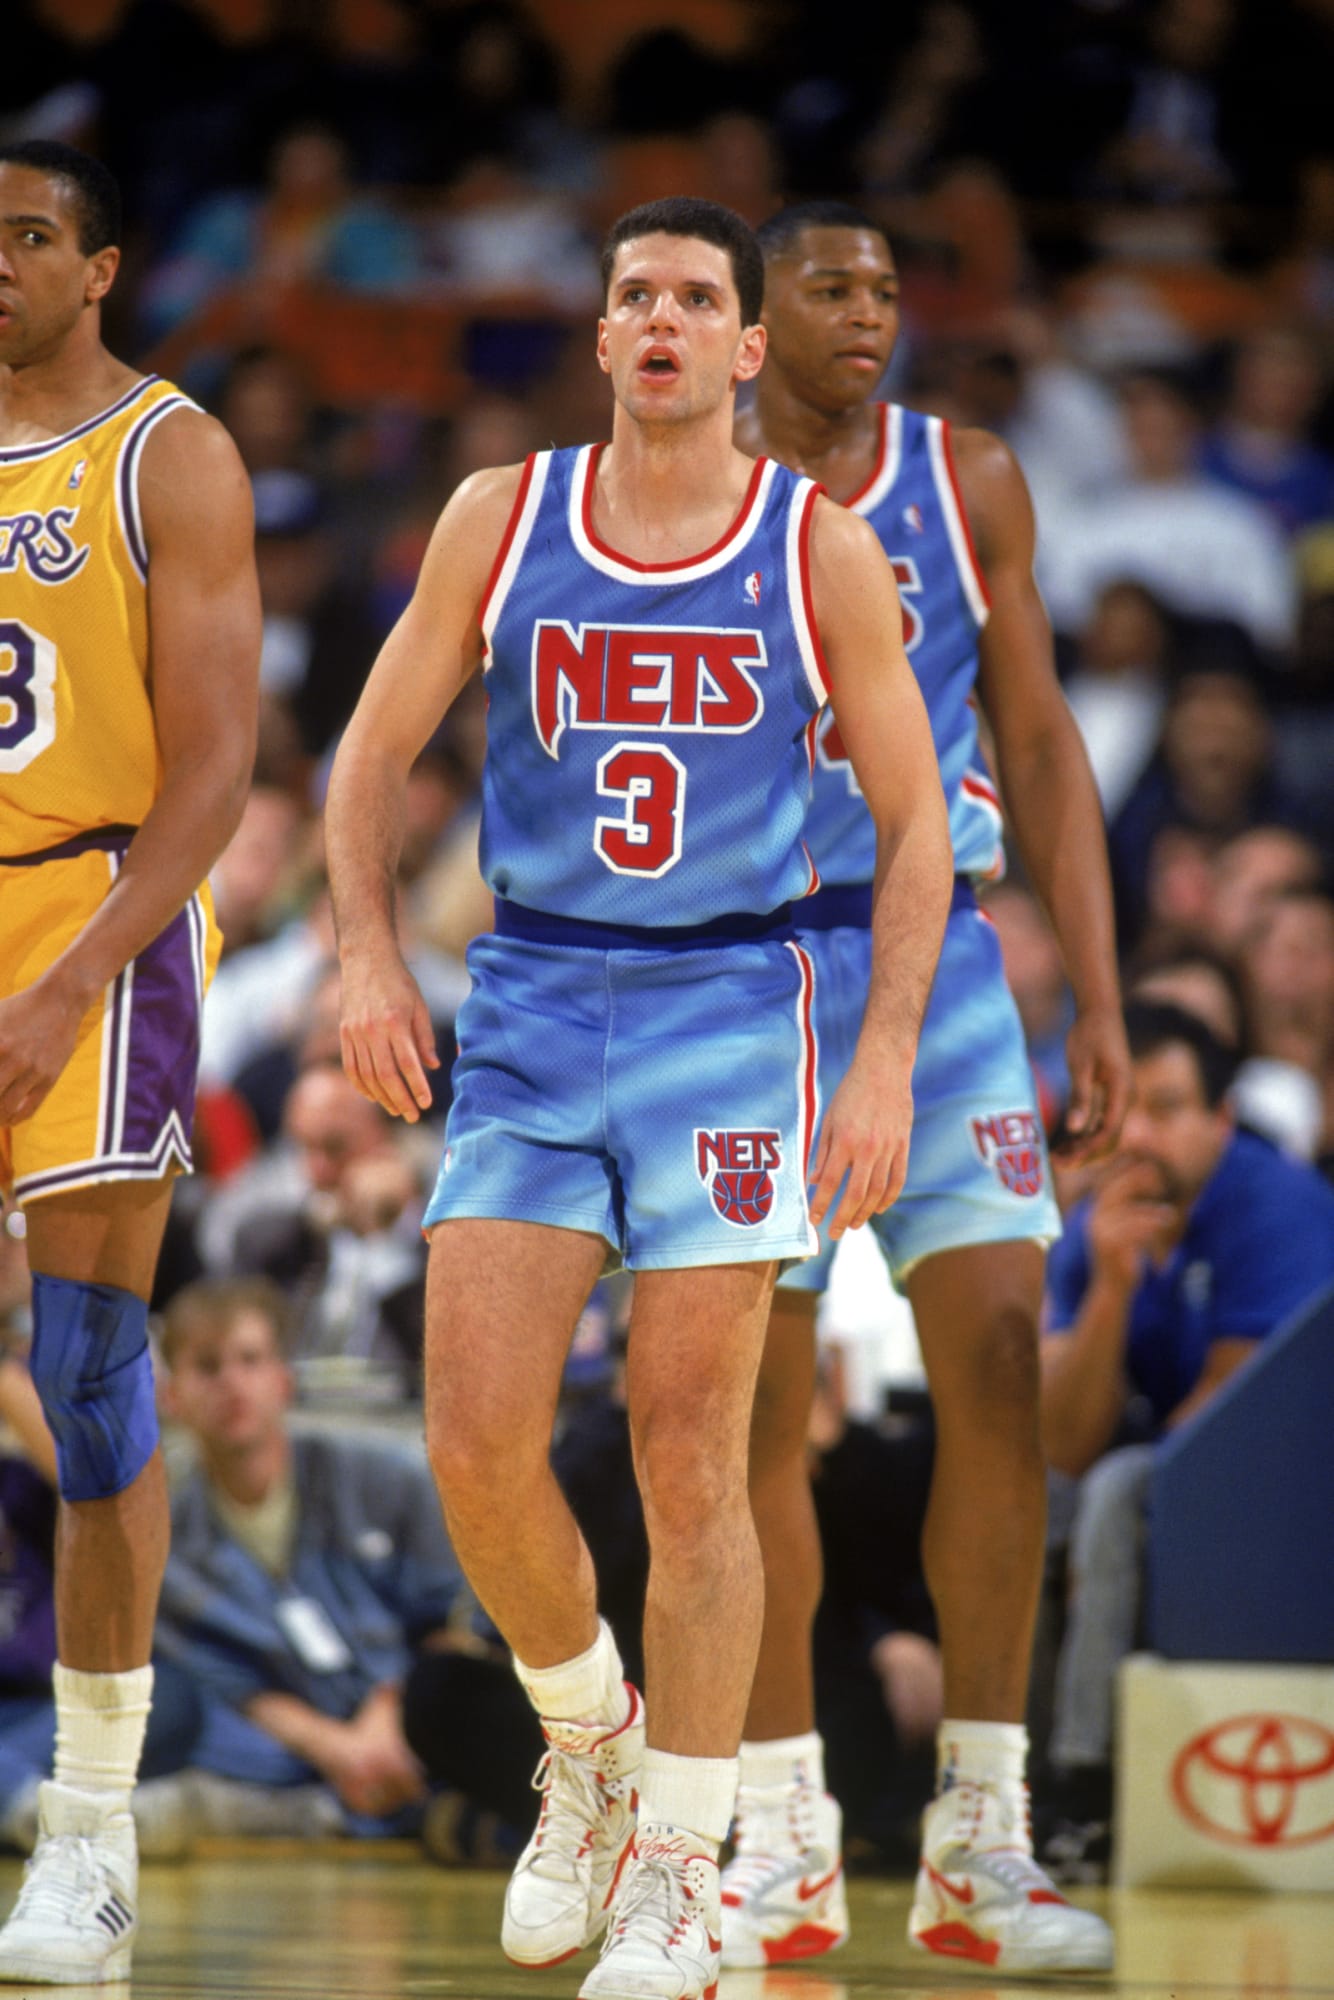 new jersey nets old uniforms